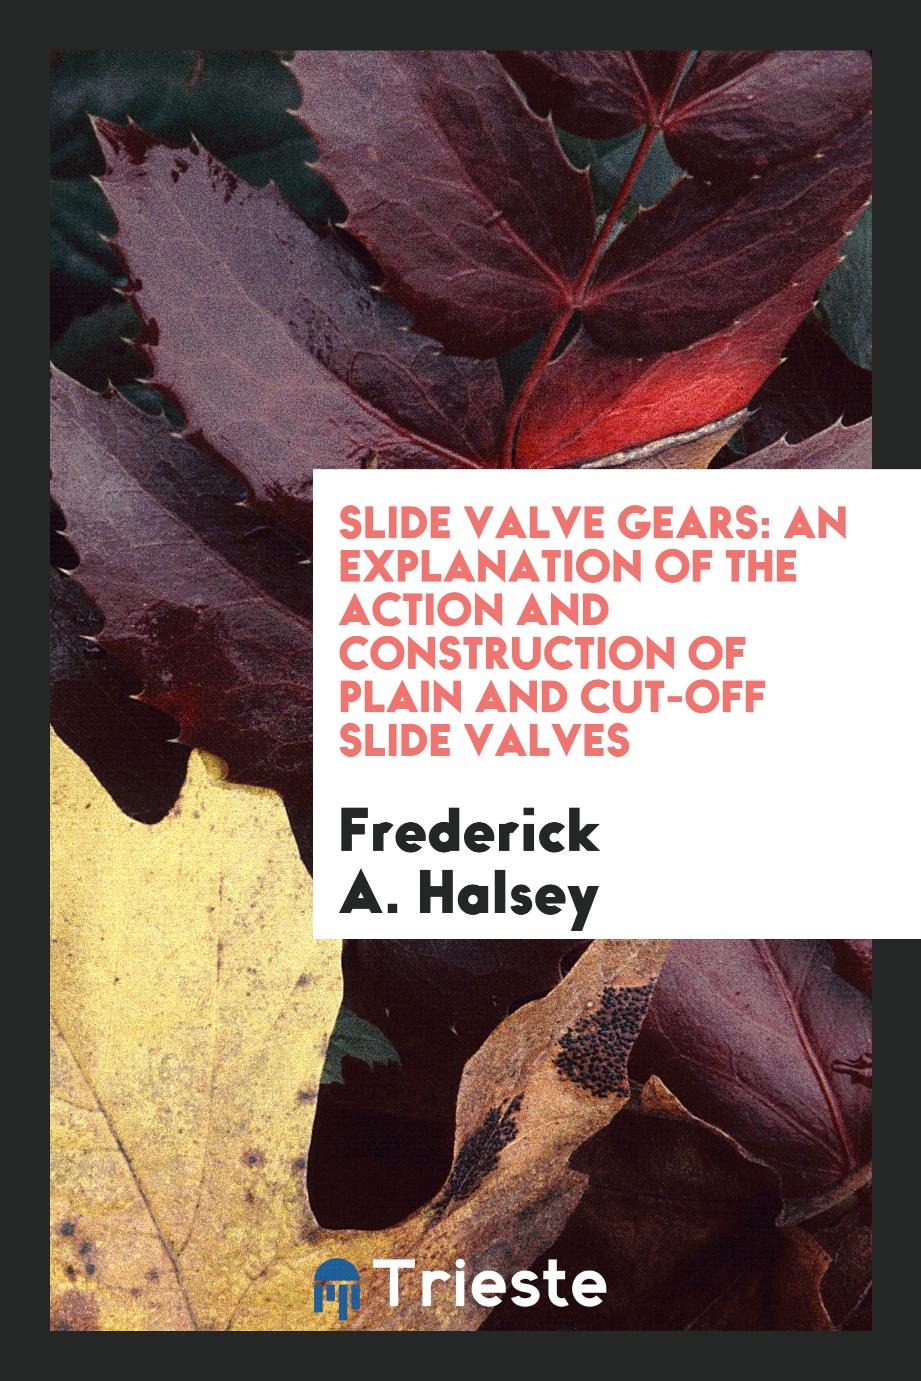 Slide valve gears: An explanation of the action and construction of plain and cut-off slide valves